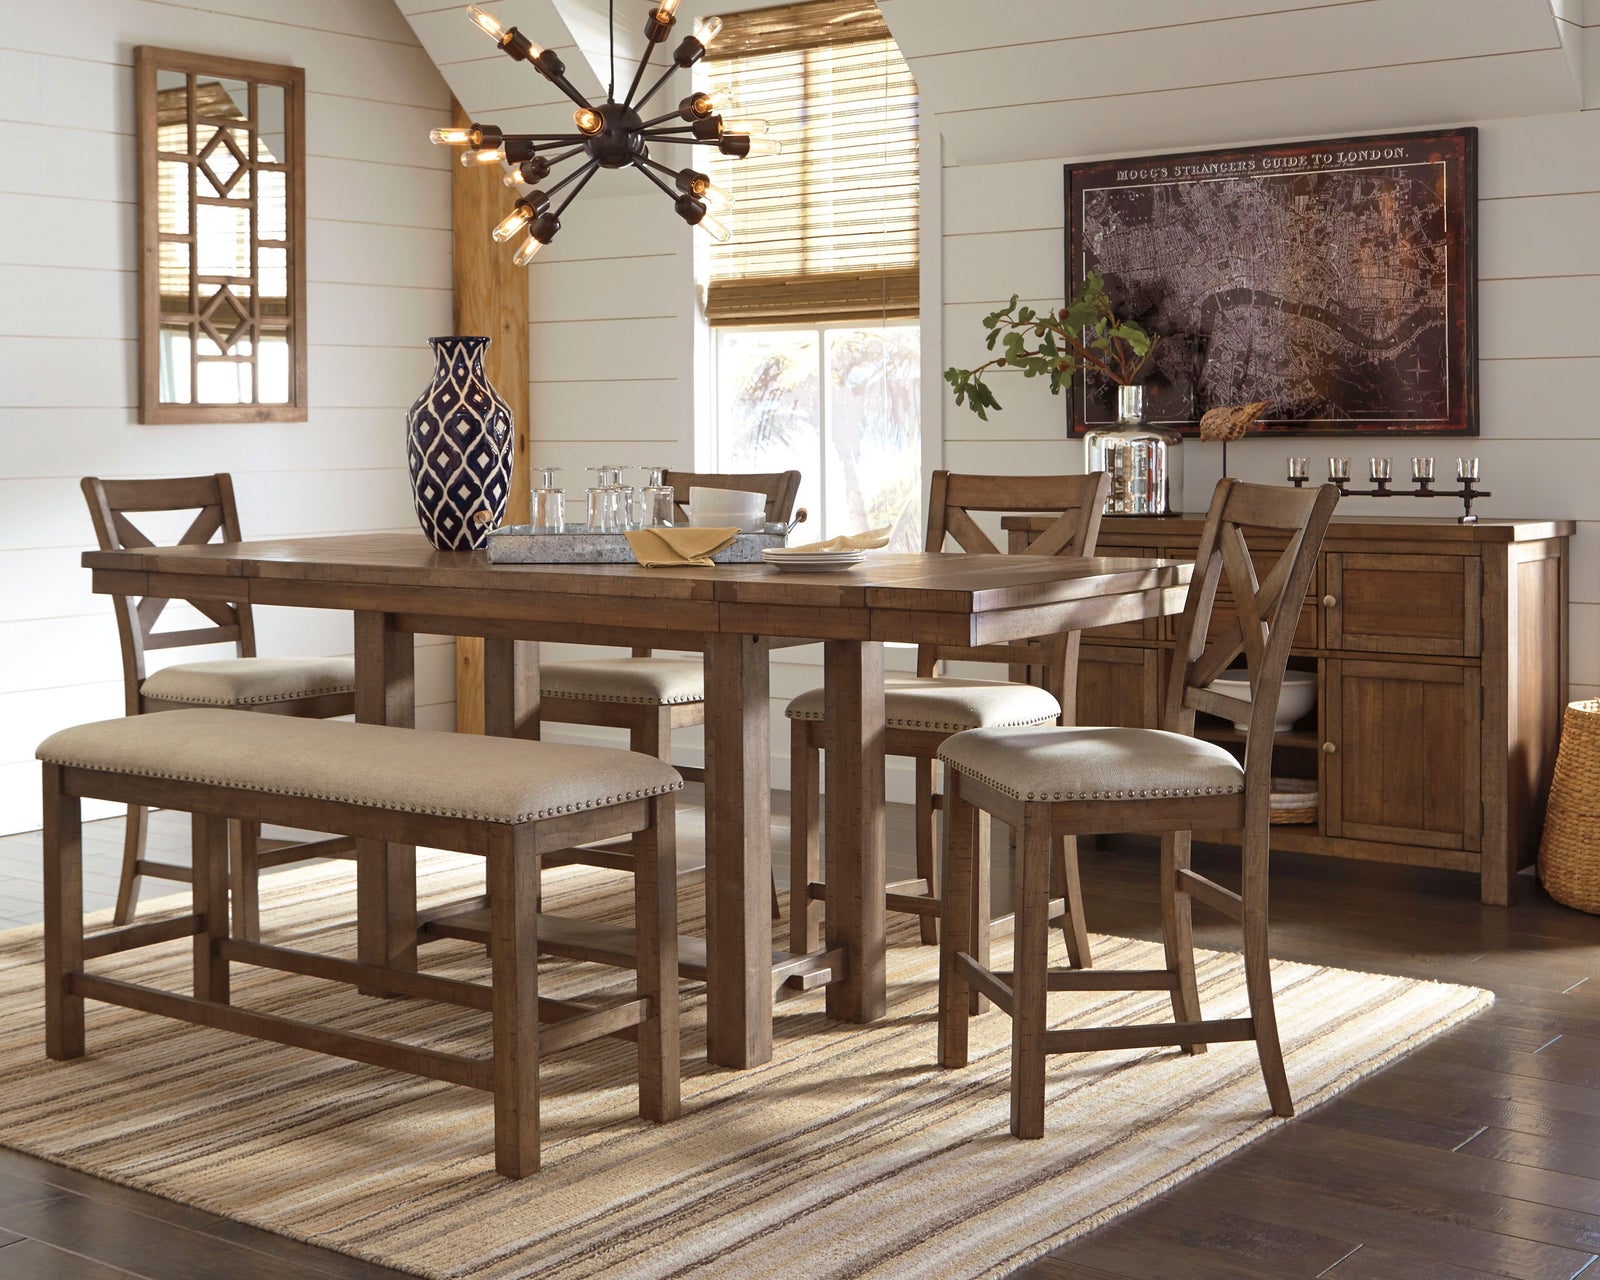 Moriville Grayish Brown Counter Height Dining Table And 4 Barstools And Bench With Storage